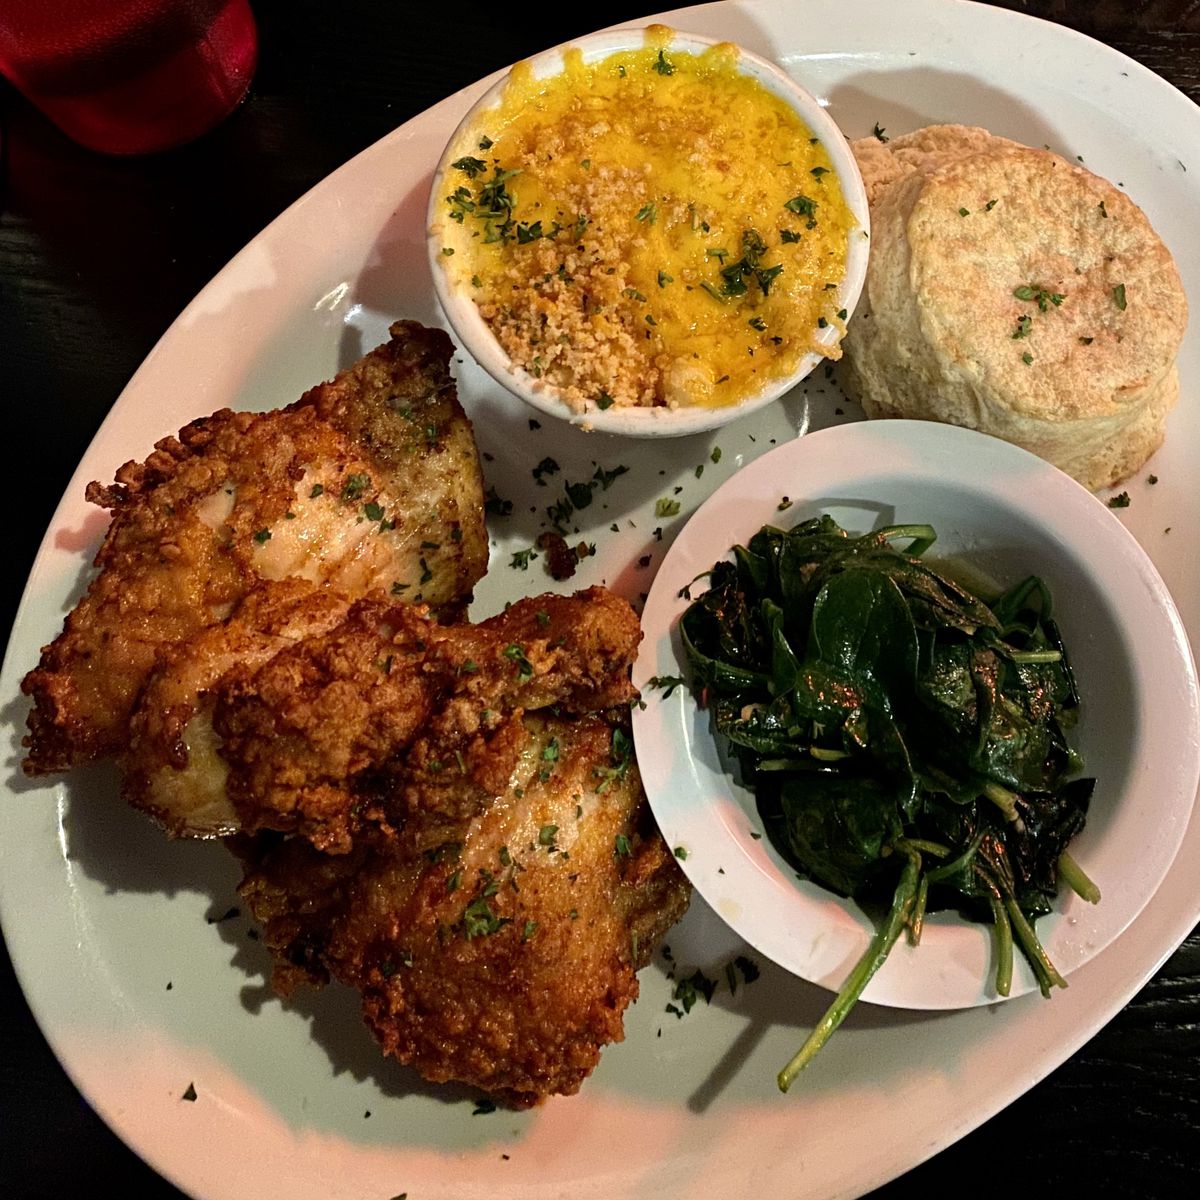 A plate of fried chicken with a biscuit, mac n cheese, and spinach.